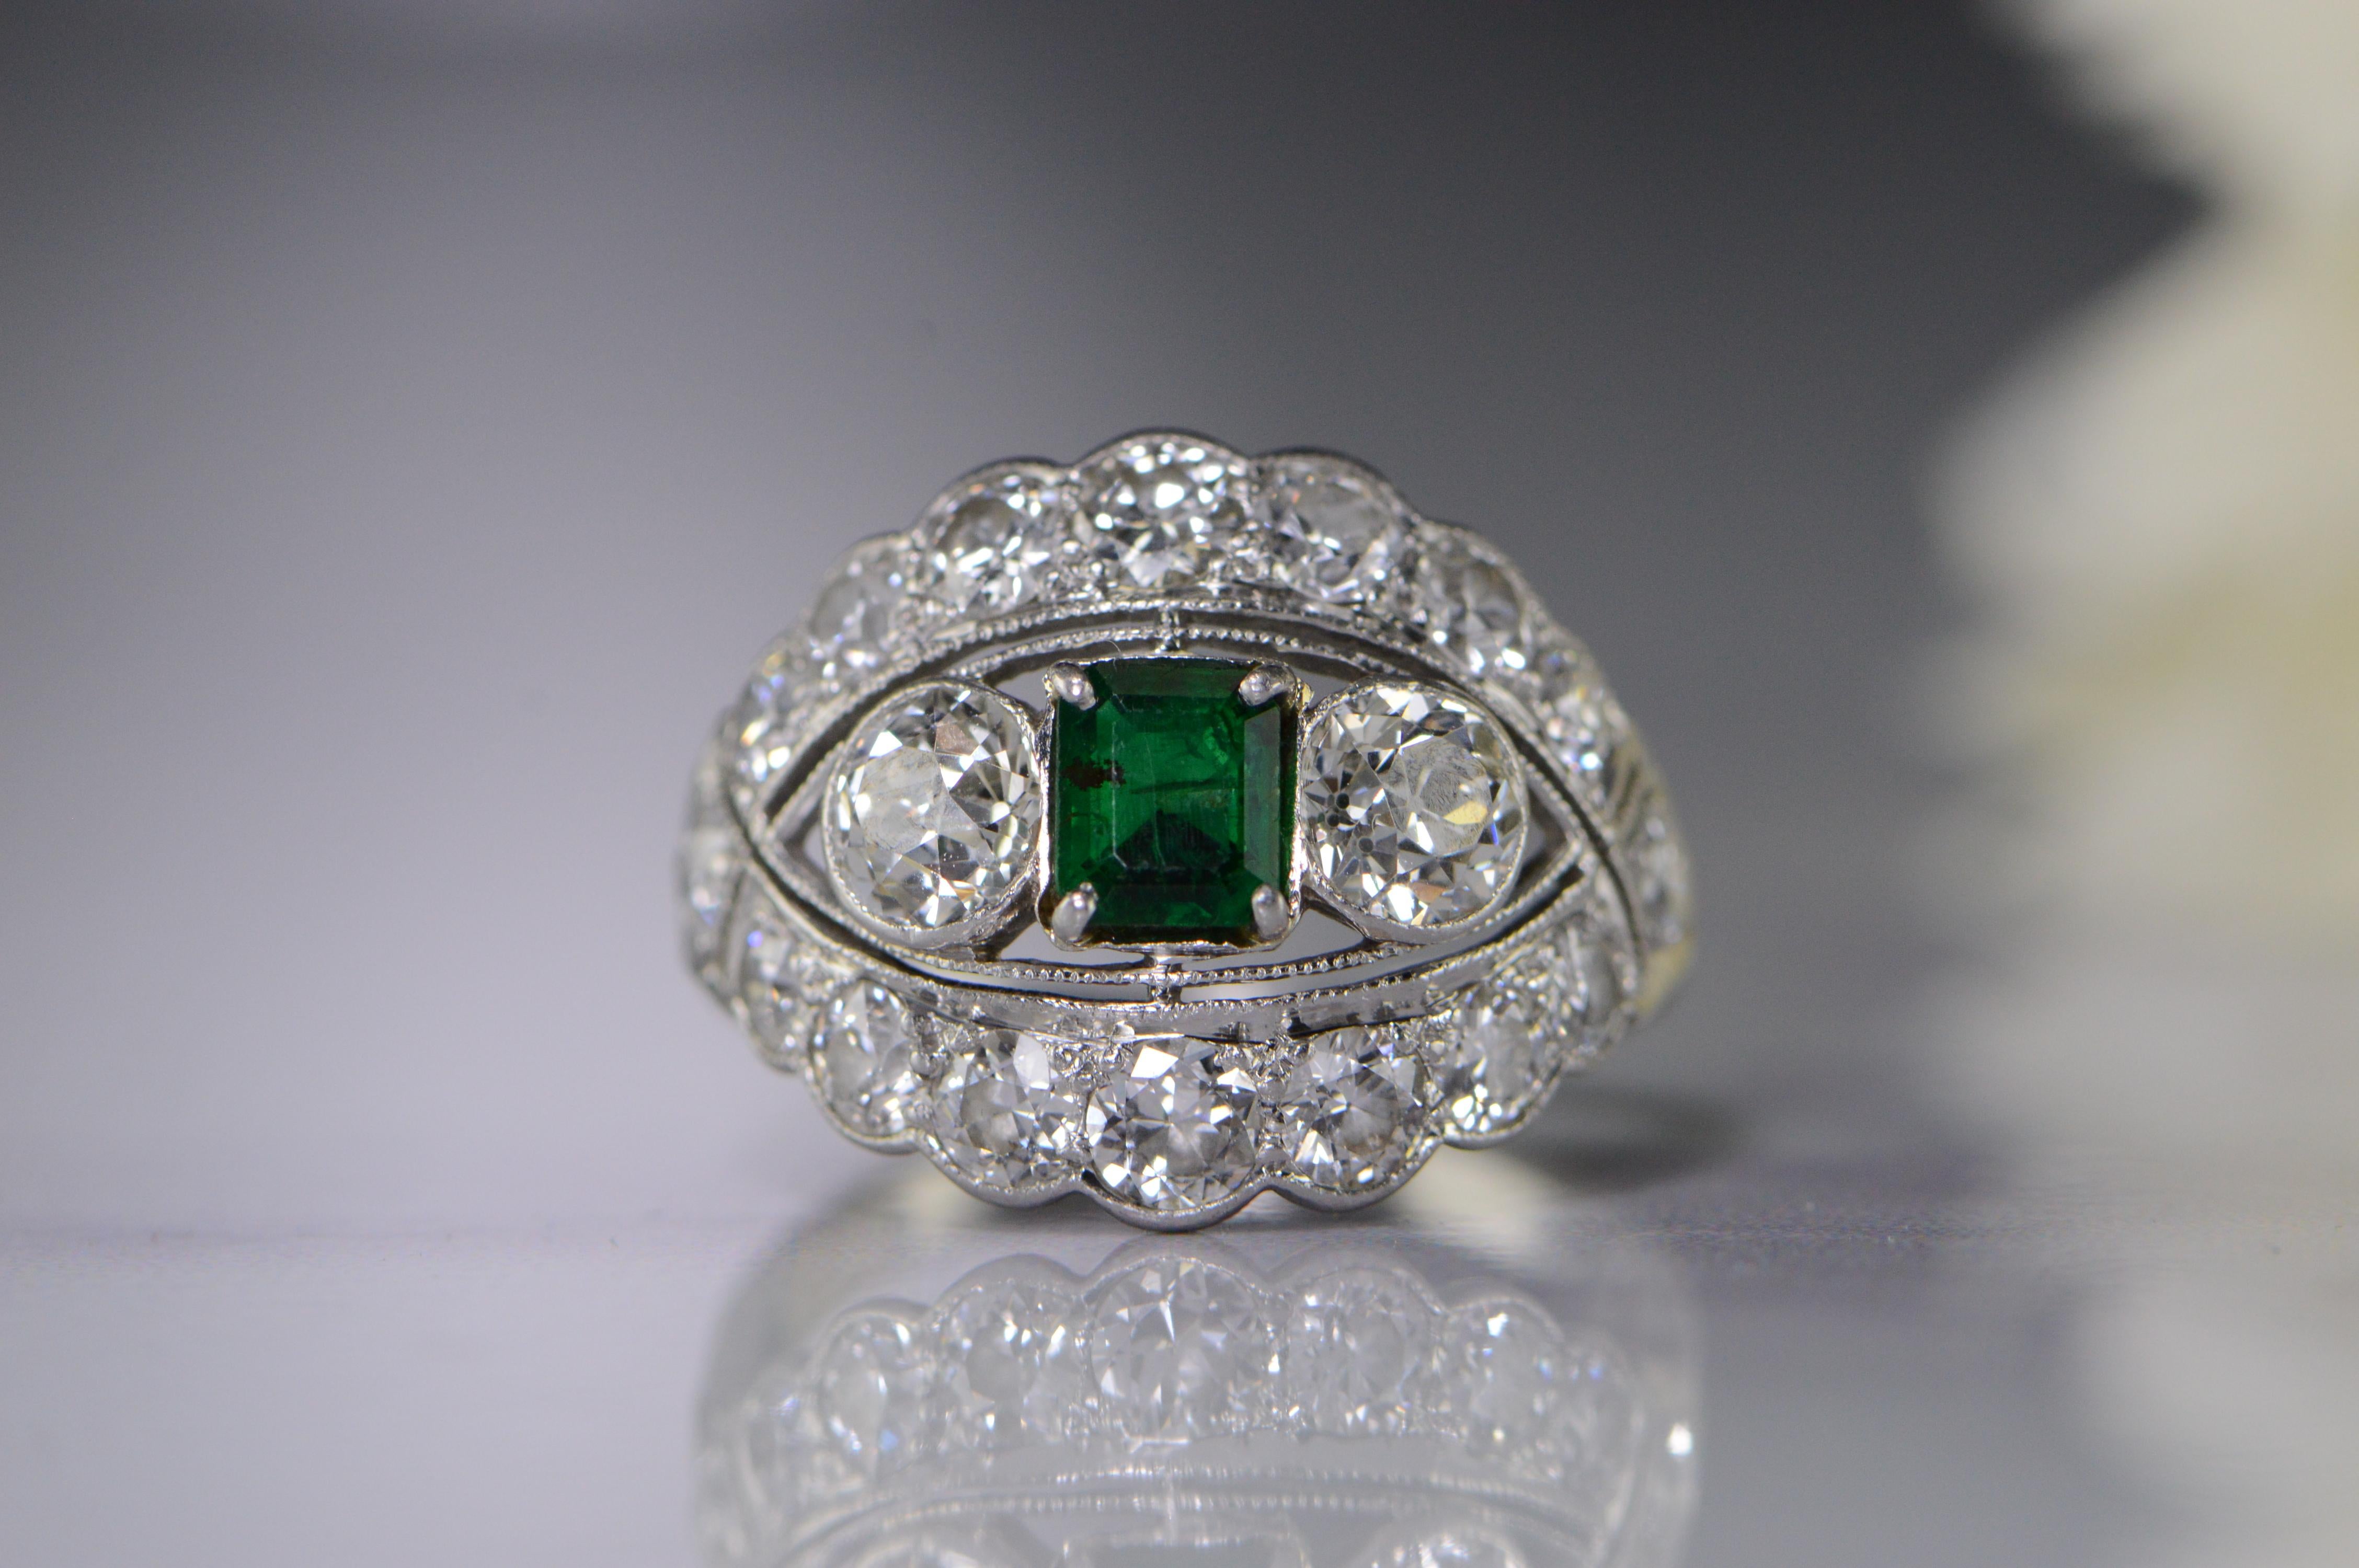 4 Carat Emerald Diamond Art Deco Platinum Engagement Ring In Excellent Condition For Sale In Frederick, MD